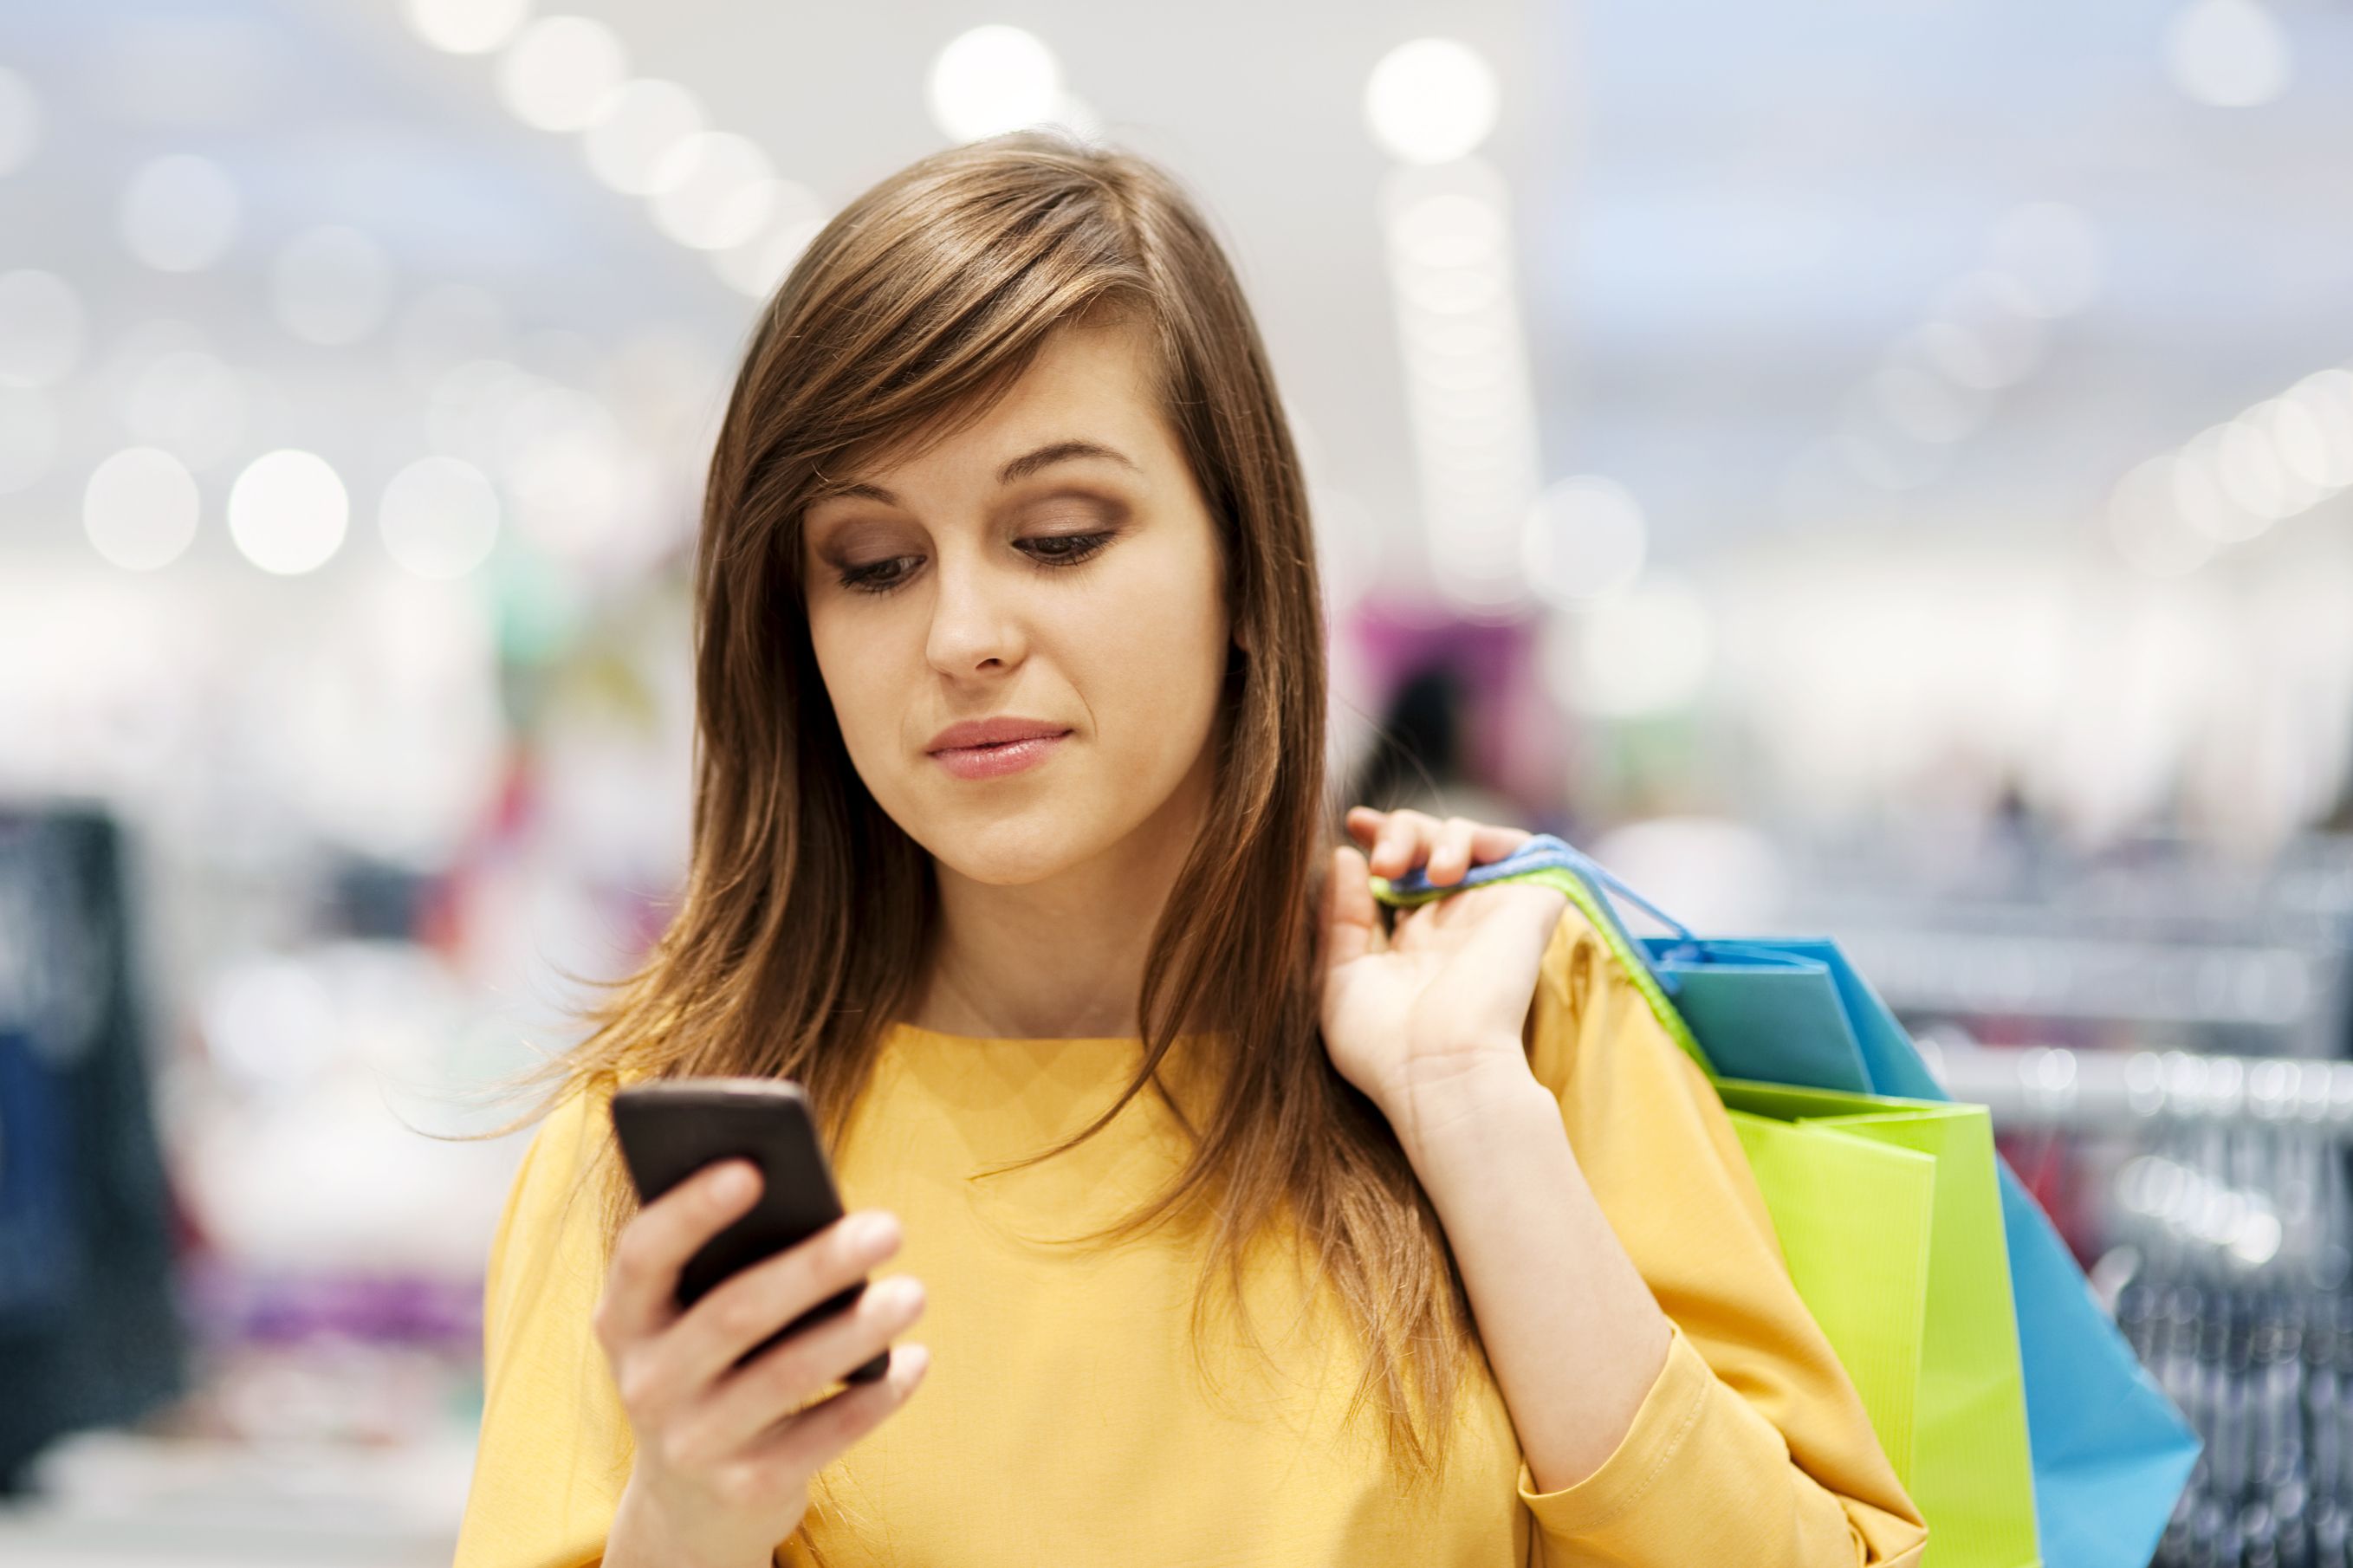 woman shopping and using smartphone | Smartphones usage | Pinterest ...